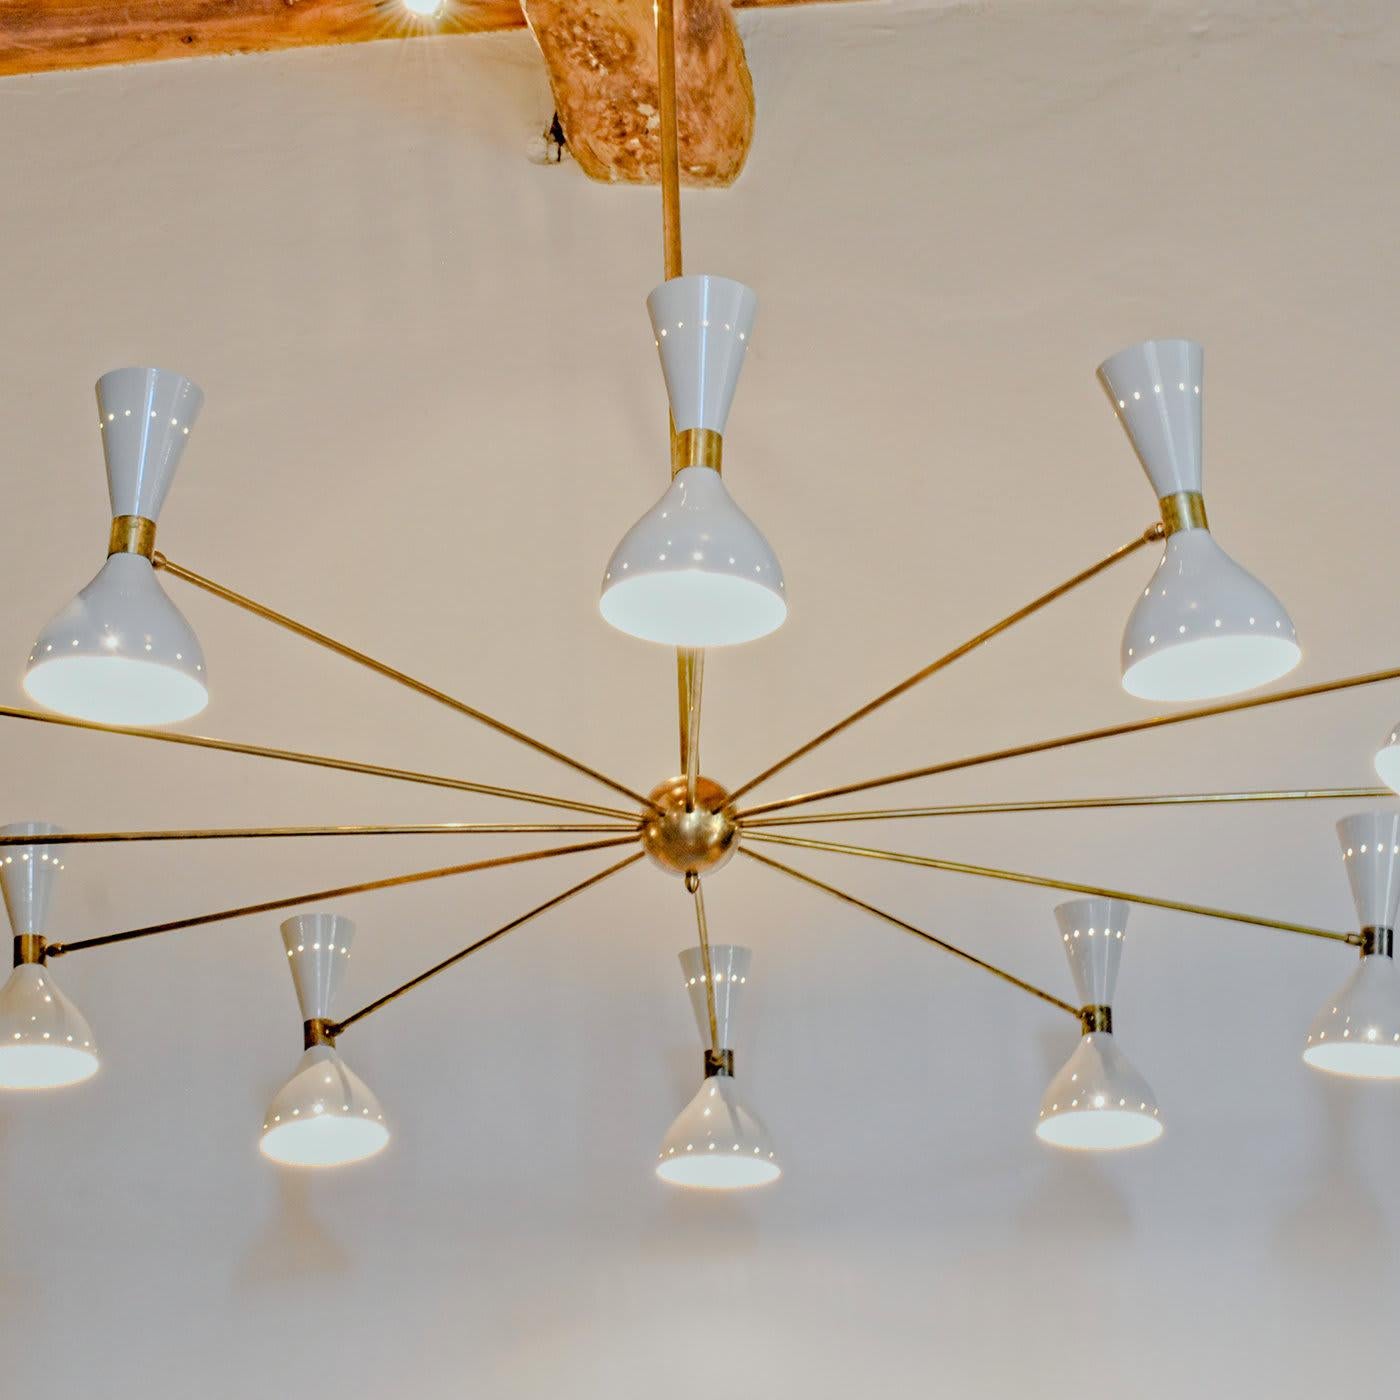 This magnificent chandelier is an imposing object of functional decor that will add luxury and elegance to a modern living room, loft space or hotel foyer. Its solid brass structure comprises a central stem with 12 arms, each supporting two aluminum